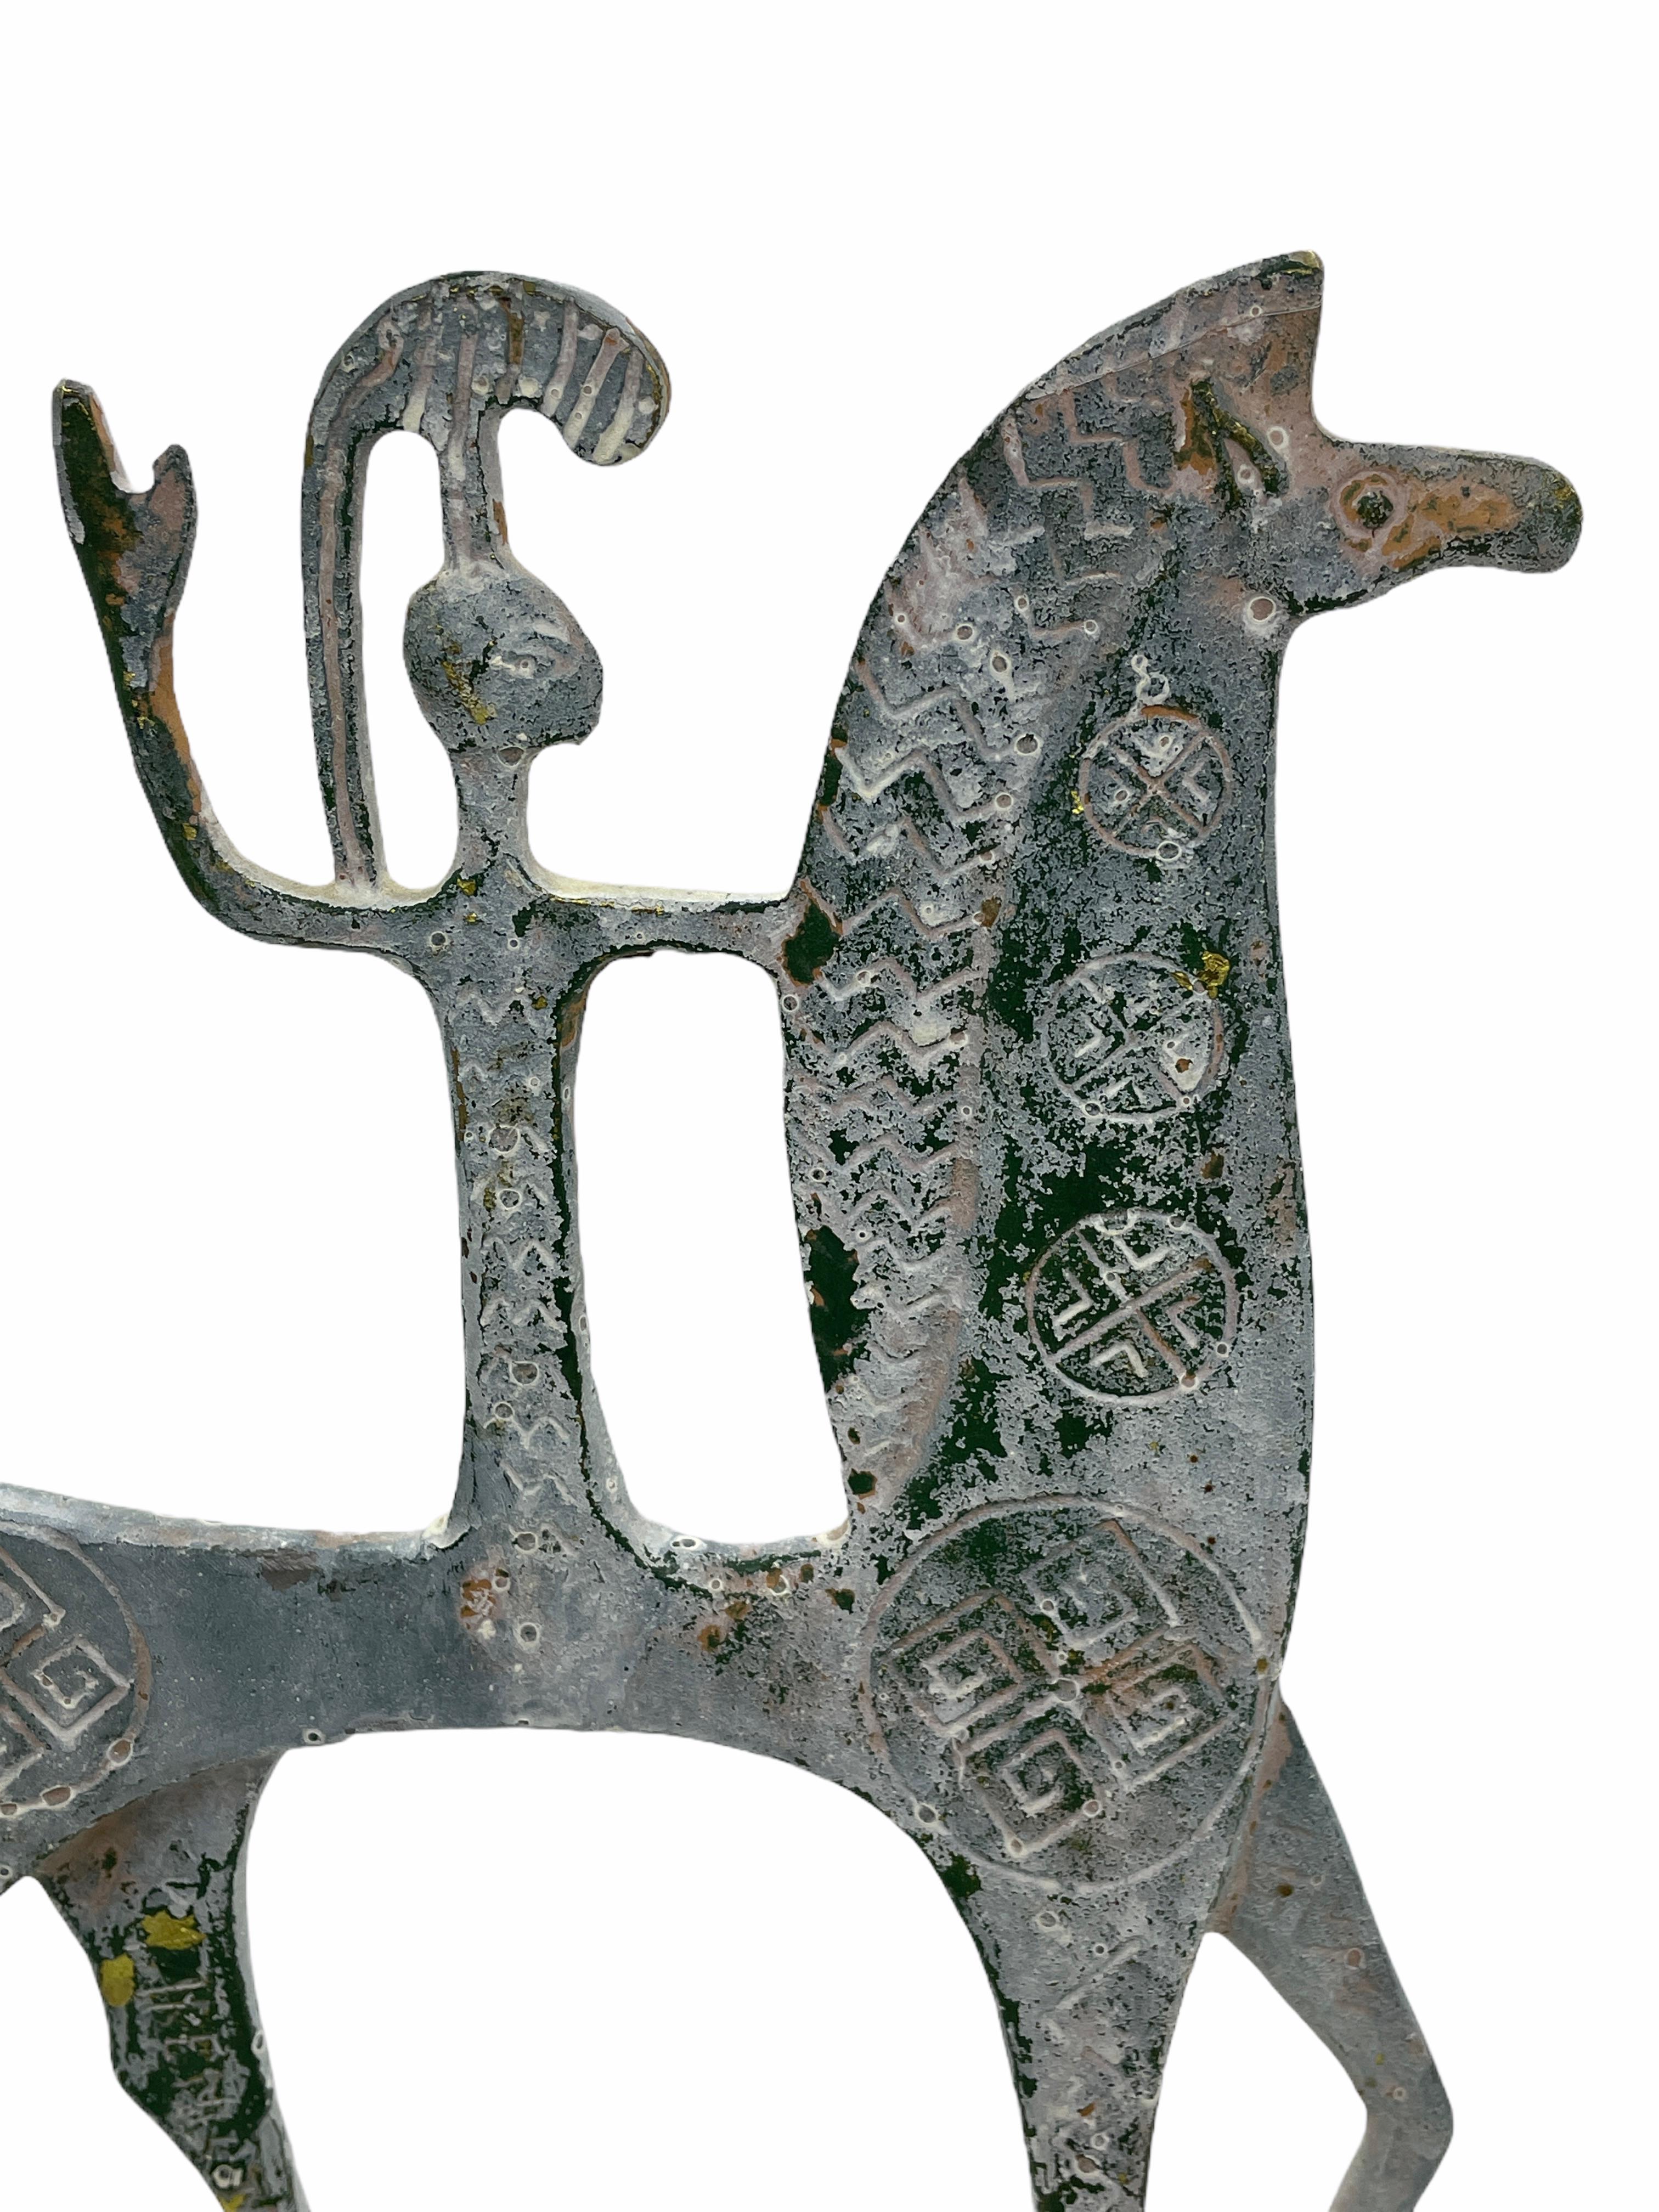 Offered is a Mid-Century Modern Pepe Mendoza style Etruscan or Greek patinated carved brass horse sculptures. This Etruscan Greek brass horse is an iconic Mid-Century Modern item of decor with carved Mid-Century Modern details. It would look